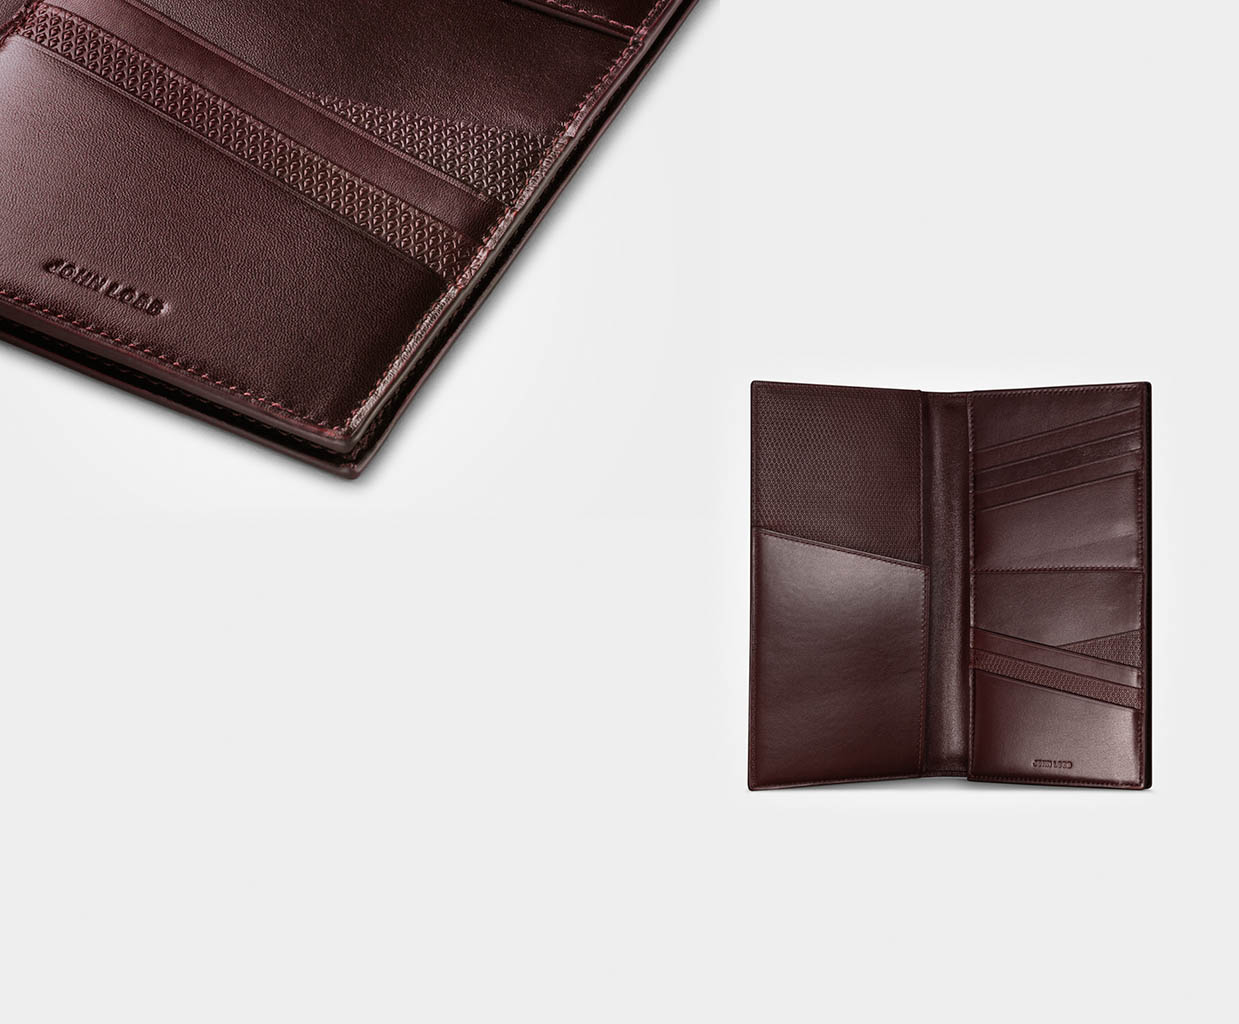 Fashion Photography of John Lobb leather wallet by Packshot Factory